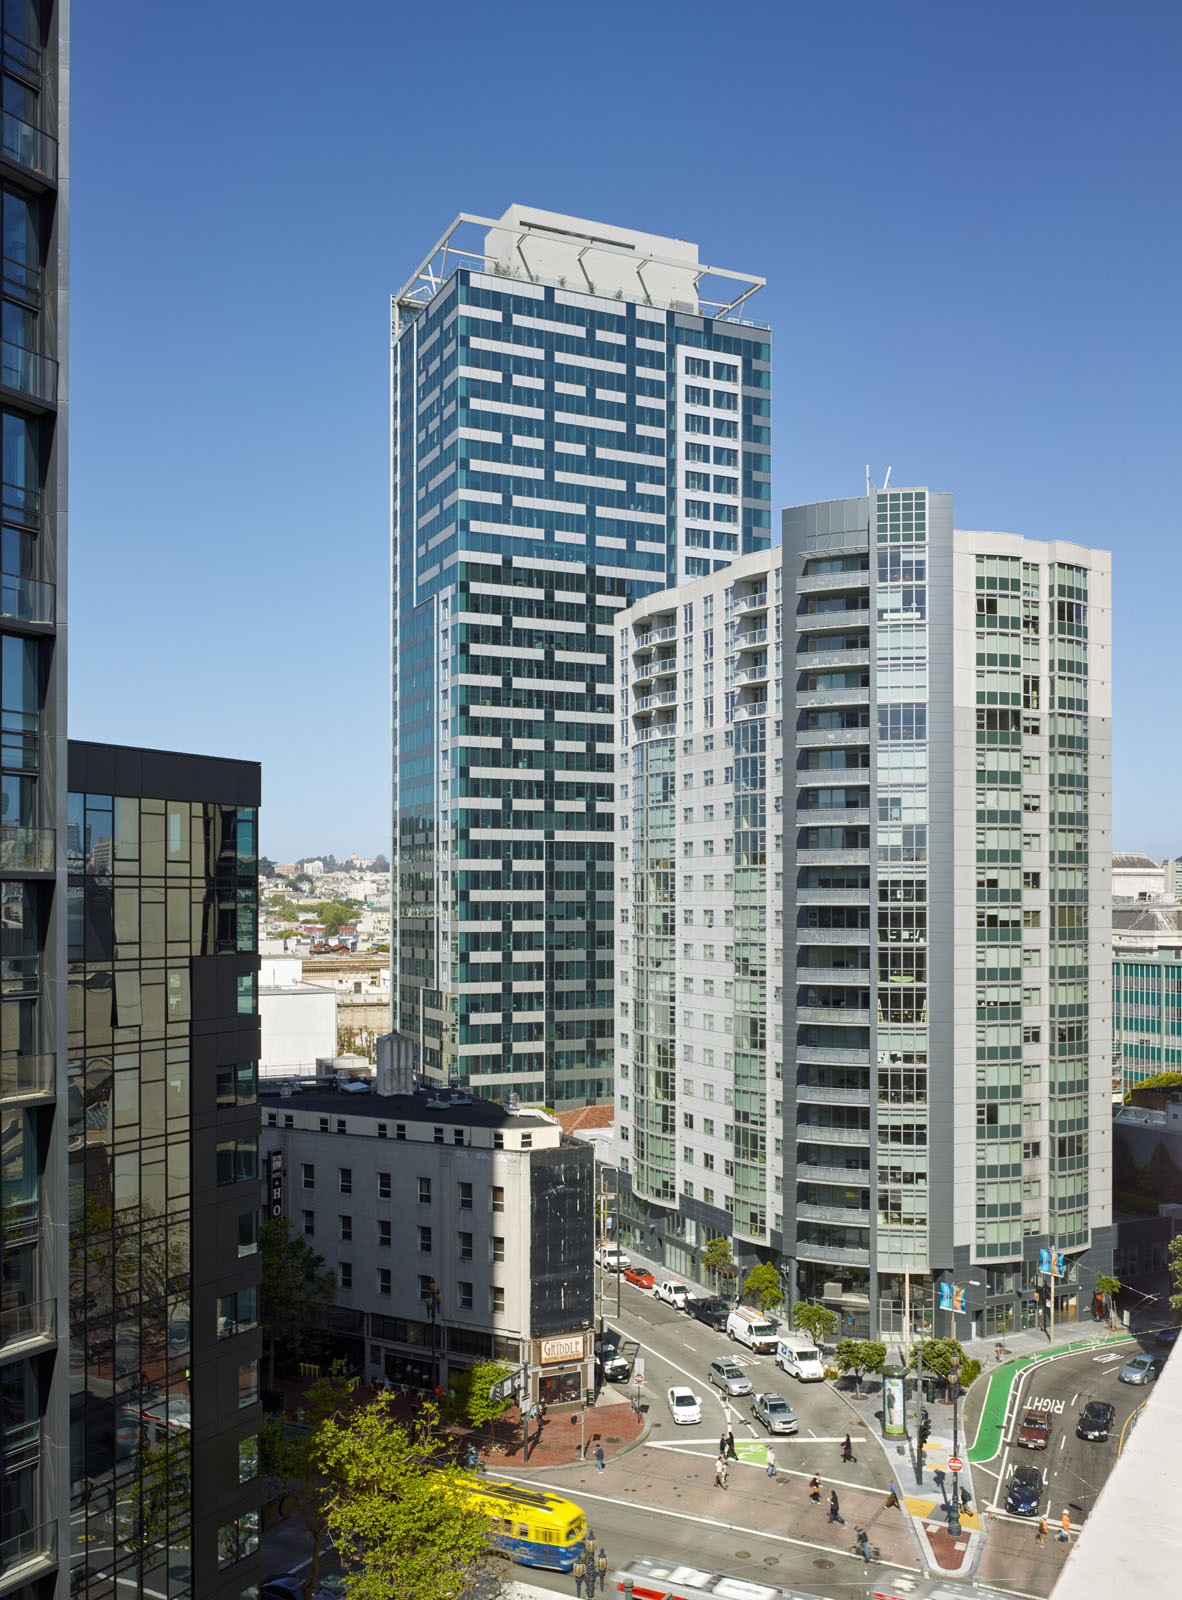 SCB's 100 Van Ness. Architecture. Adaptive reuse. Renovation. Residential.